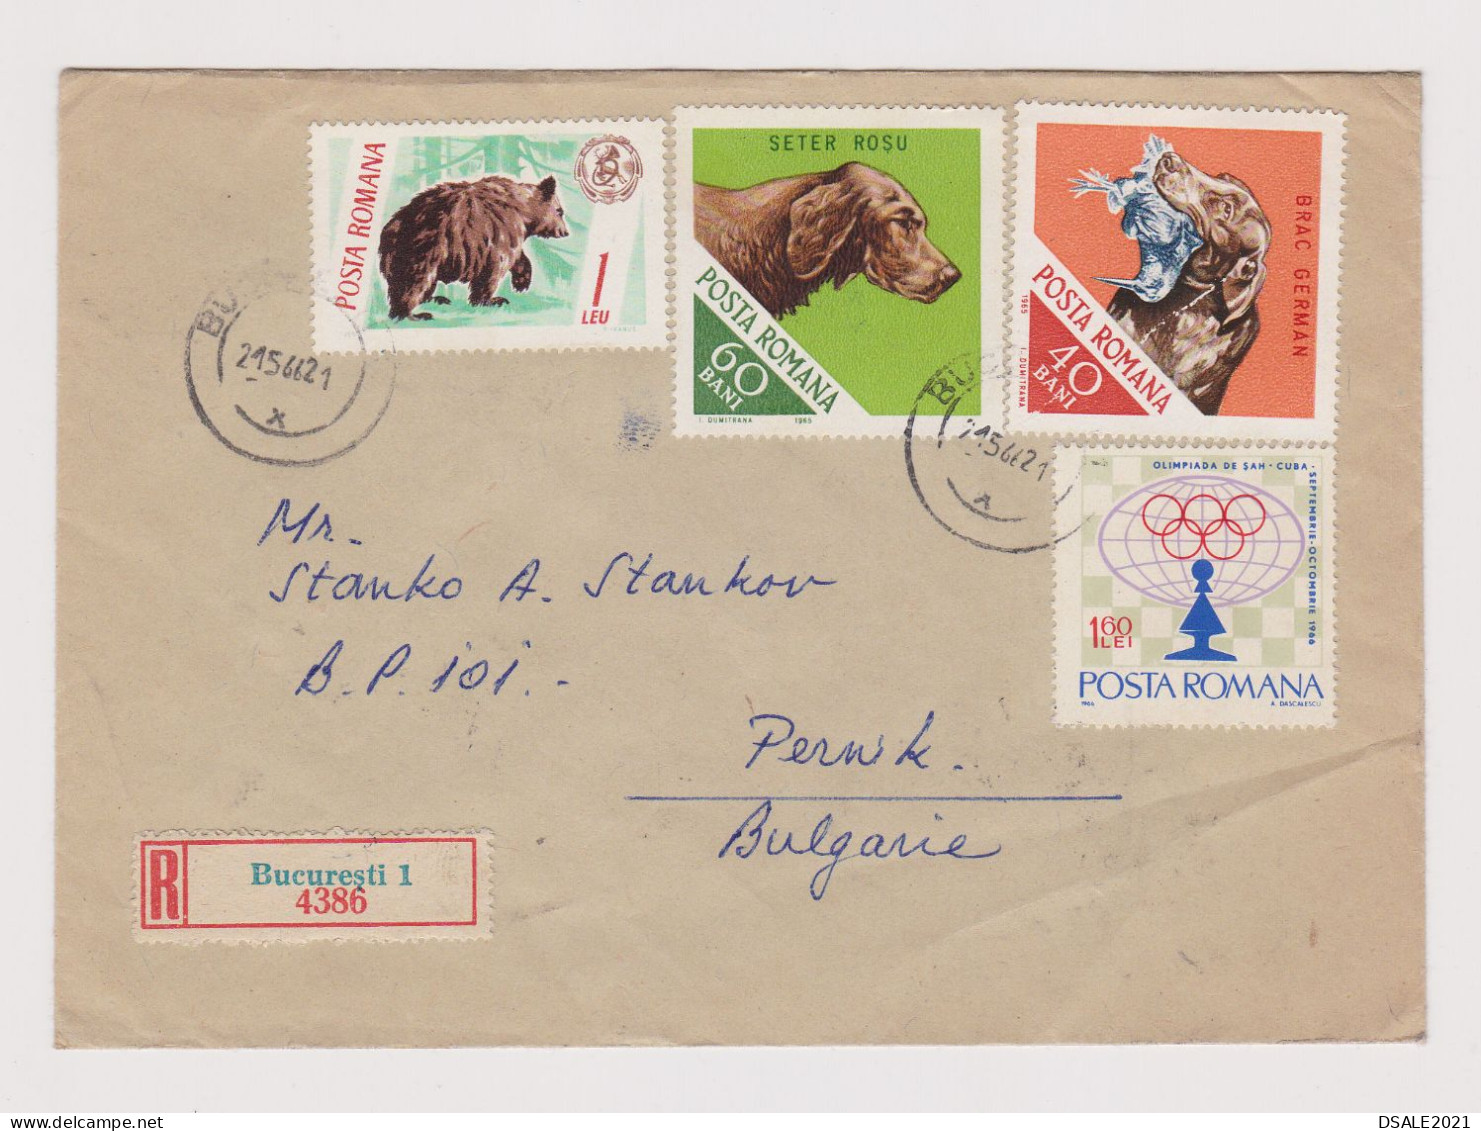 Romania Rumänien 1960s Registered Cover With Topic Stamps Bear, Hunting Dogs, Dog, Chess, Sent To Bulgaria (933) - Covers & Documents